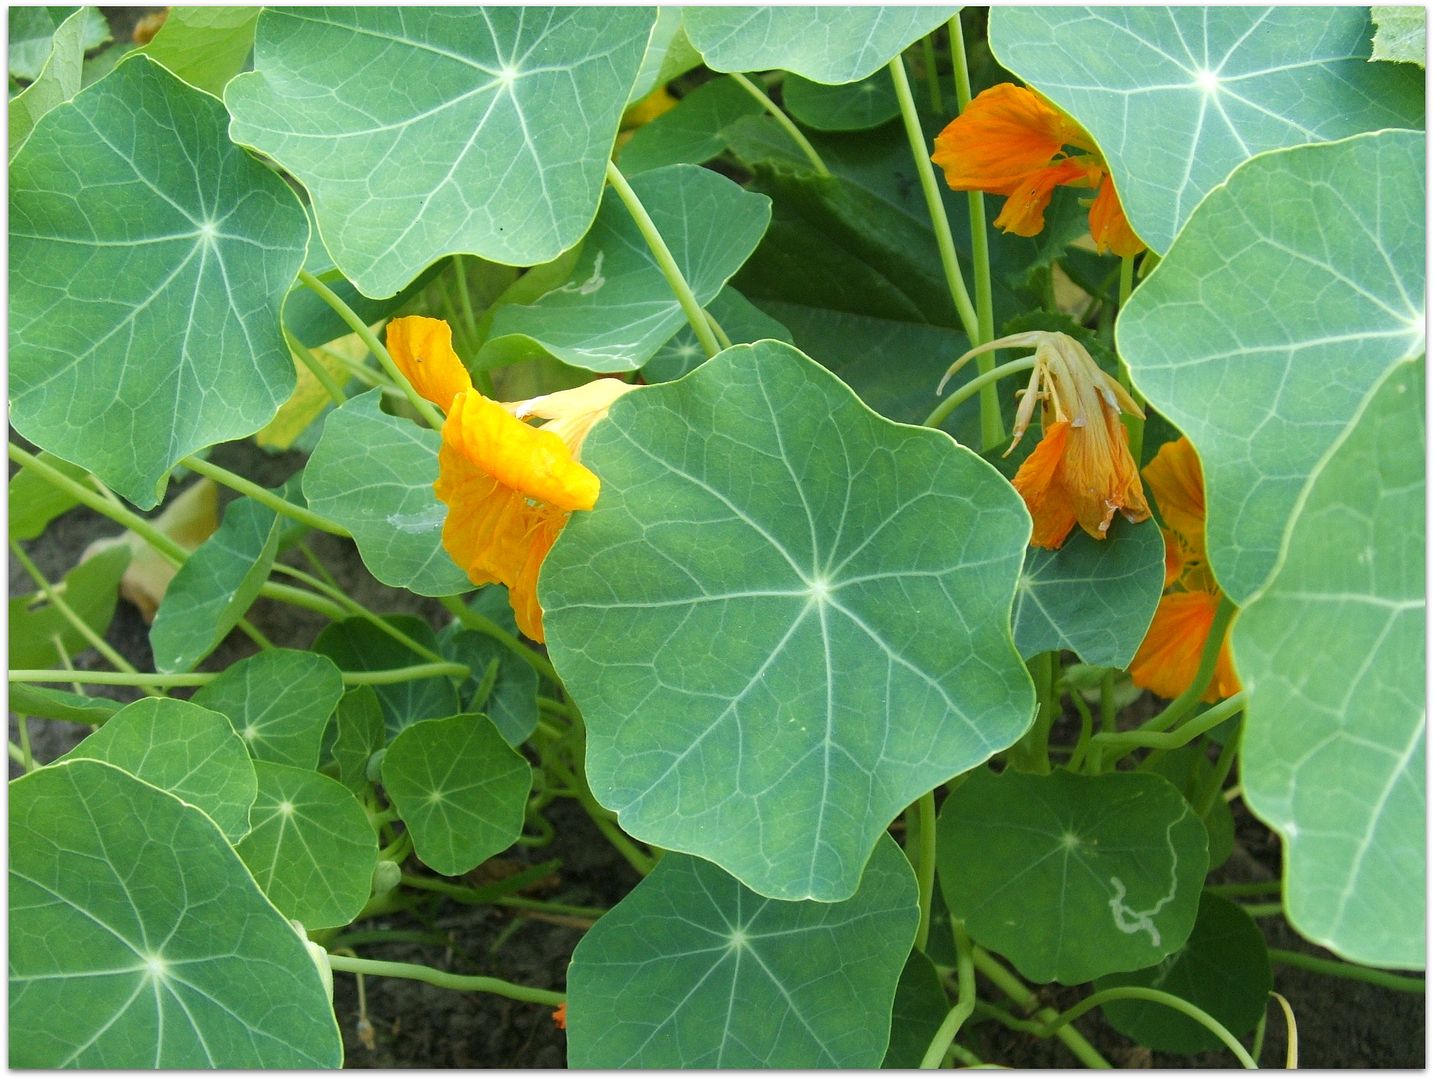 Nasturtiums by Angie Ouellette-Tower for godsgrowinggarden.com photo 019_zpsc47275e6.jpg